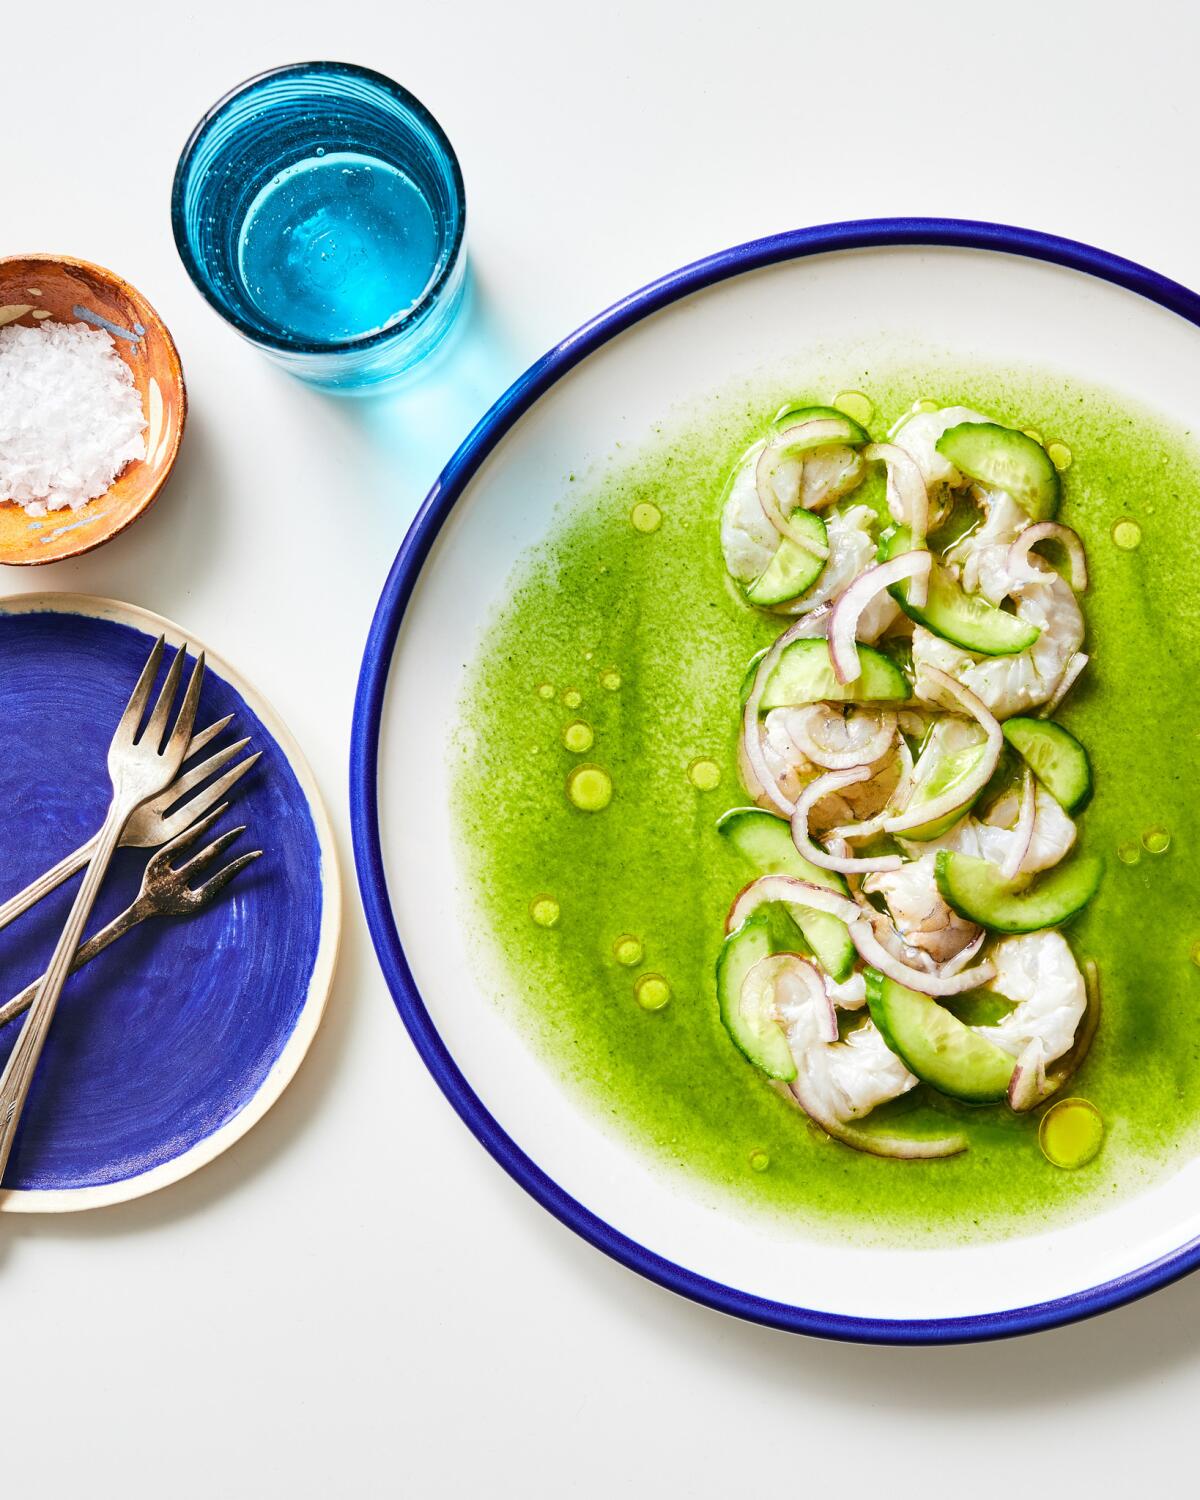 Cucumber and red onion add crunch to this aguachile.